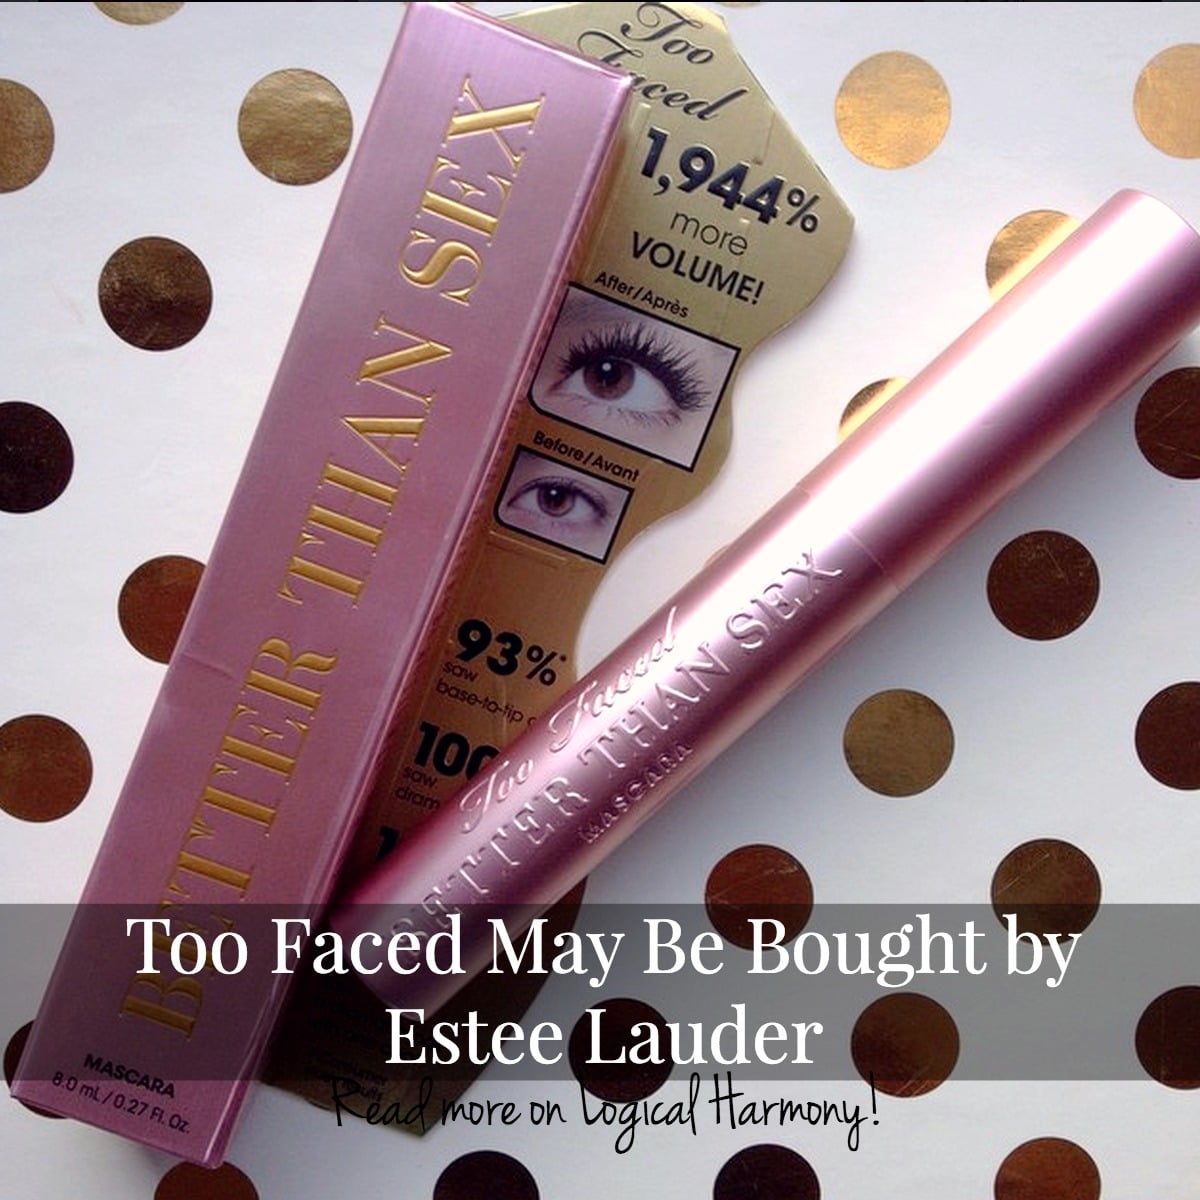 Too Faced May Be Bought by Estee Lauder